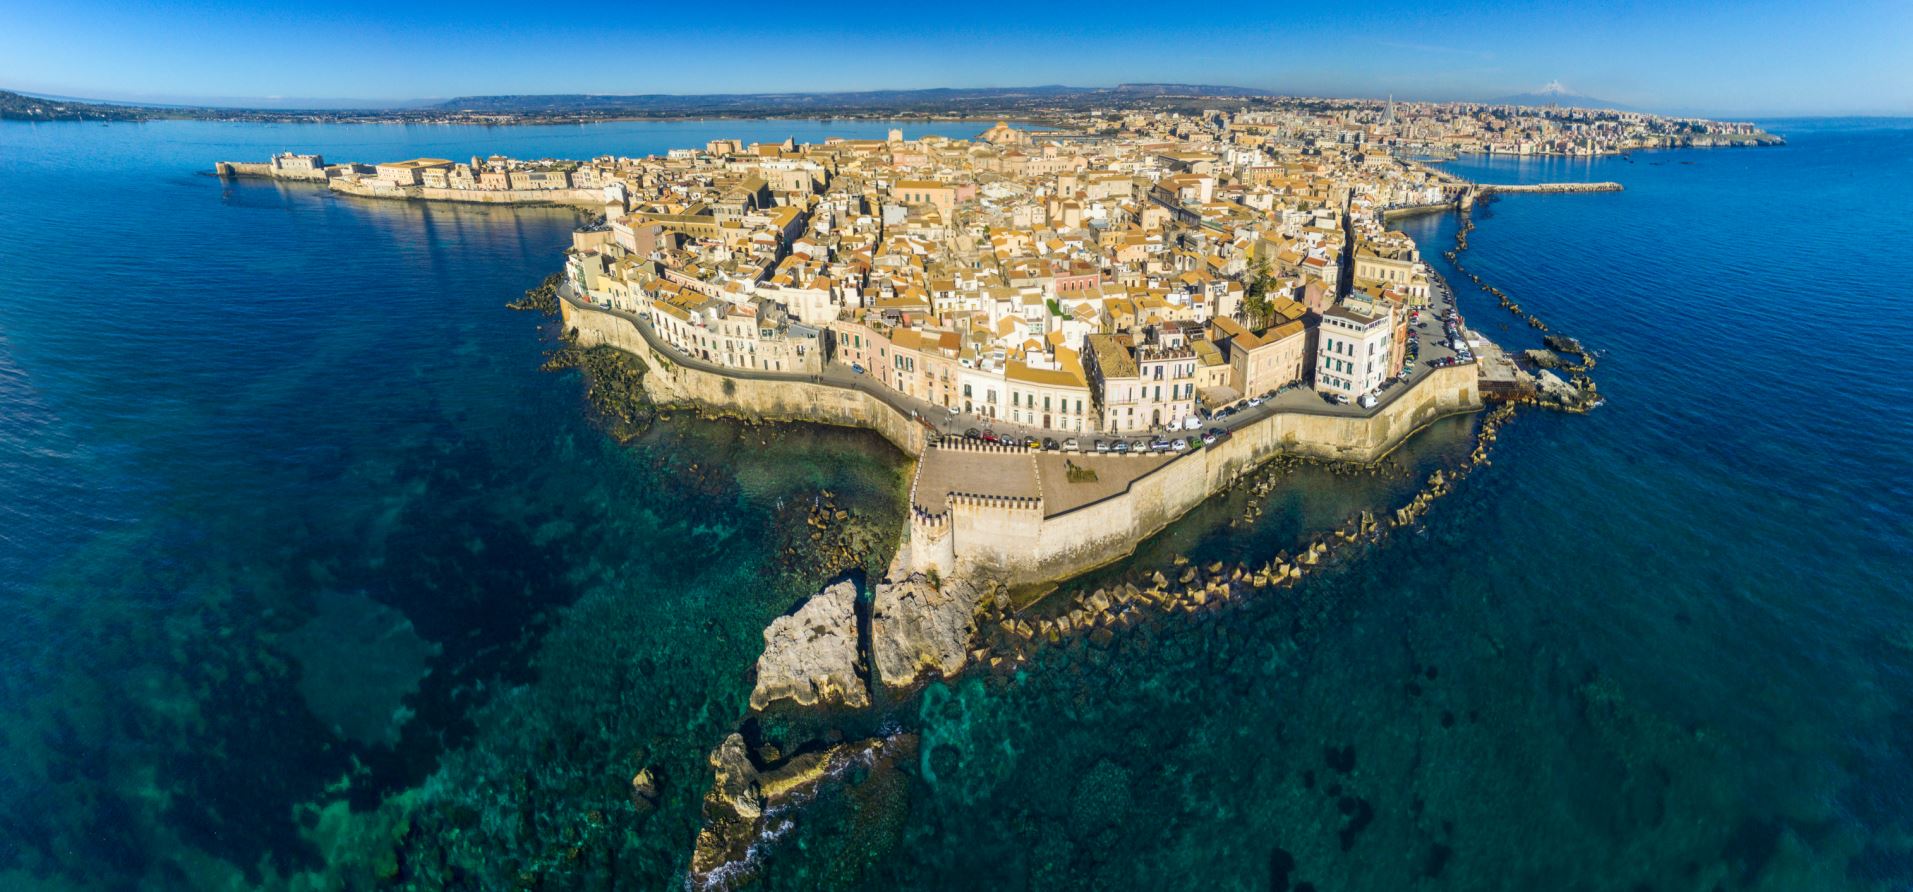 Remission Forenkle orm Highlights of Sicily - LocalWondersTravel Italy